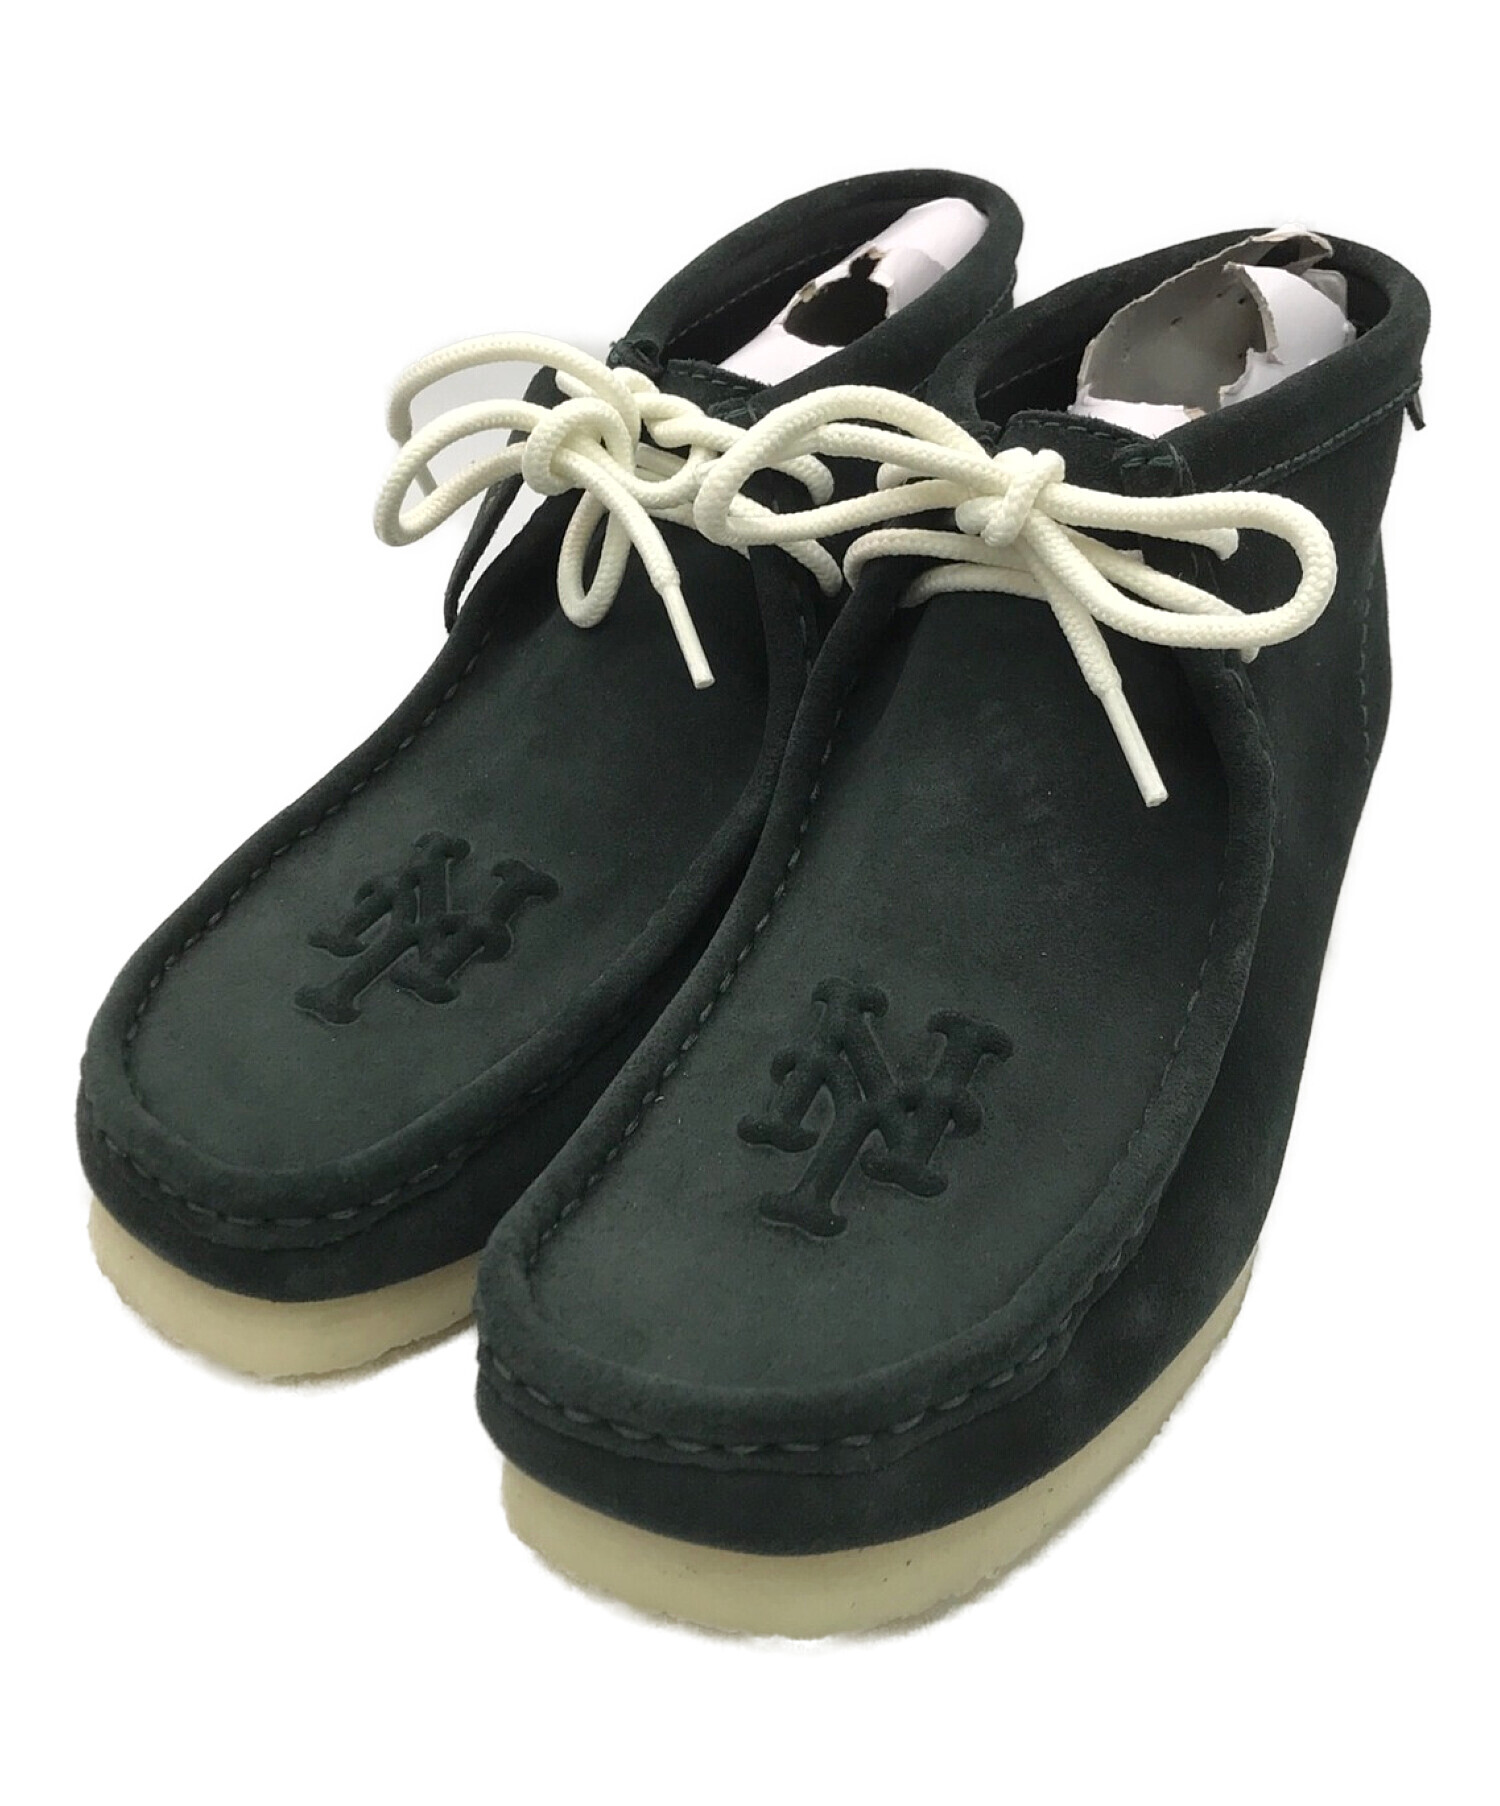 KITH × MLB for Clarks Originals Wallabee